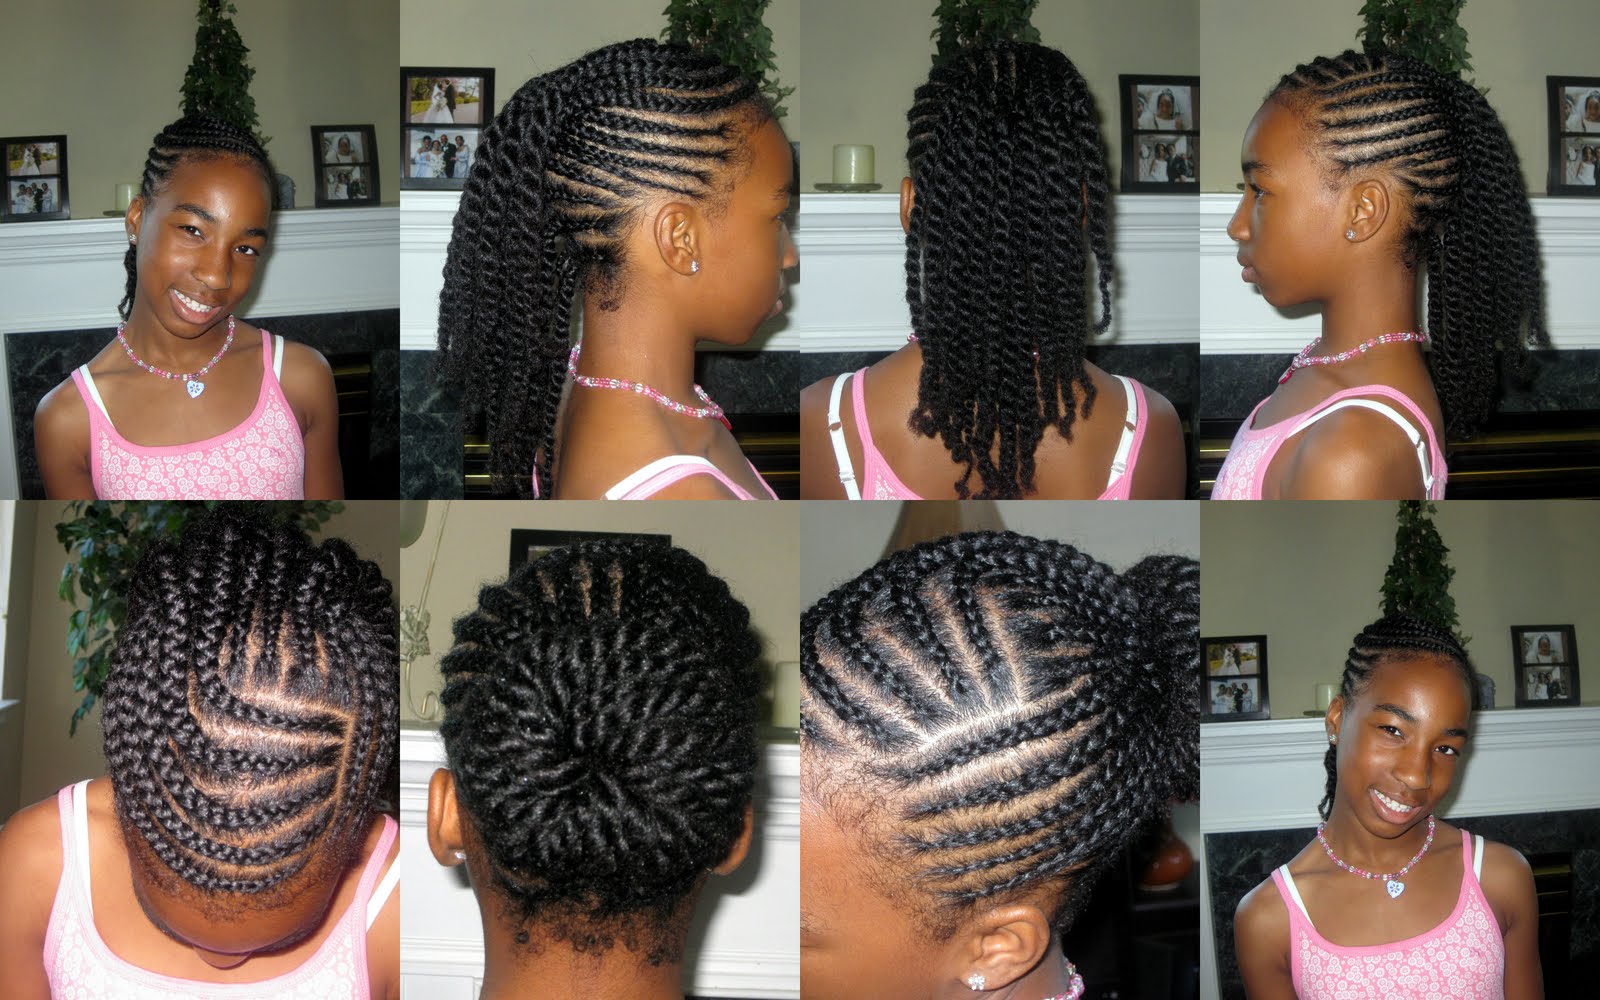 8. Cornrow Hairstyles for Little Boys - wide 8